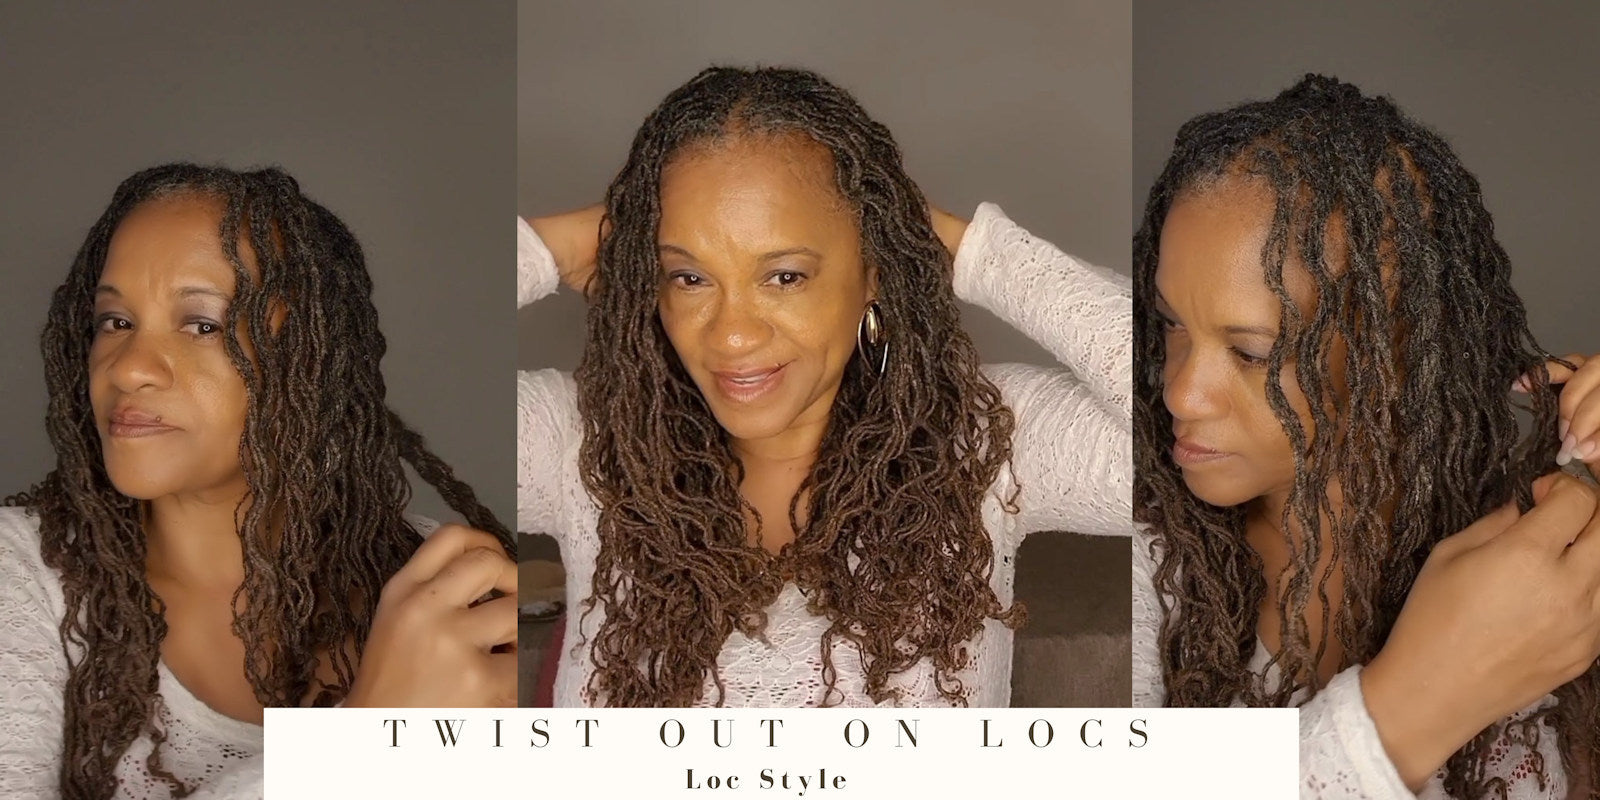 A Twist Out on Locs, an easy Hairstyle to add volume to your Sisterlocks, Micro locs or Dreadlocks